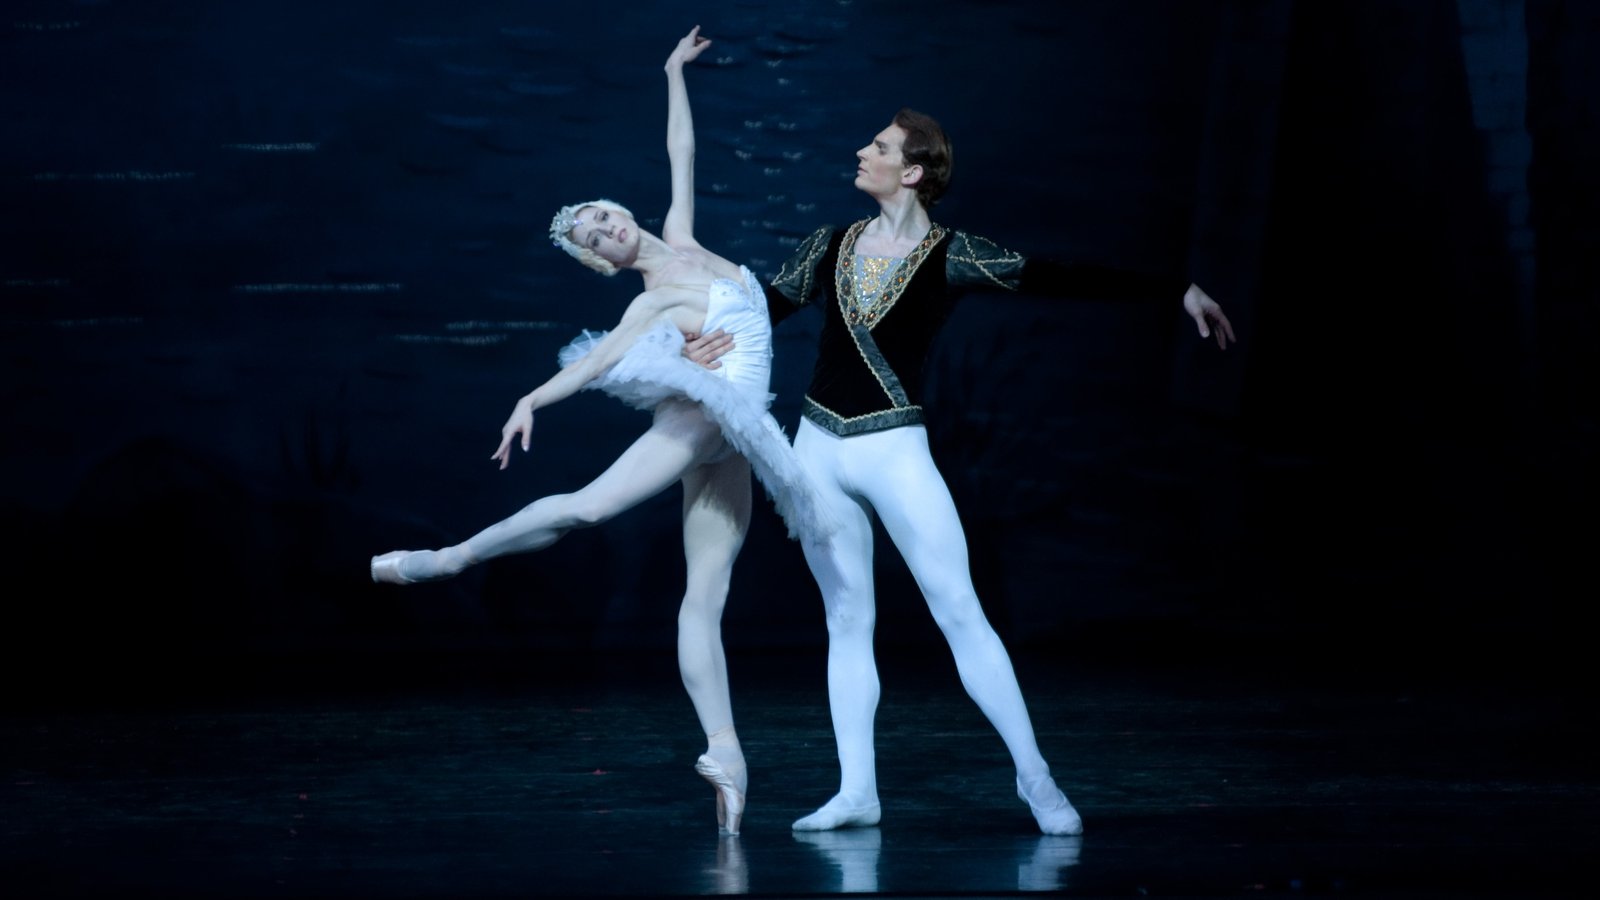 Win tickets to see Moscow City Ballet's Swan Lake at the BGET